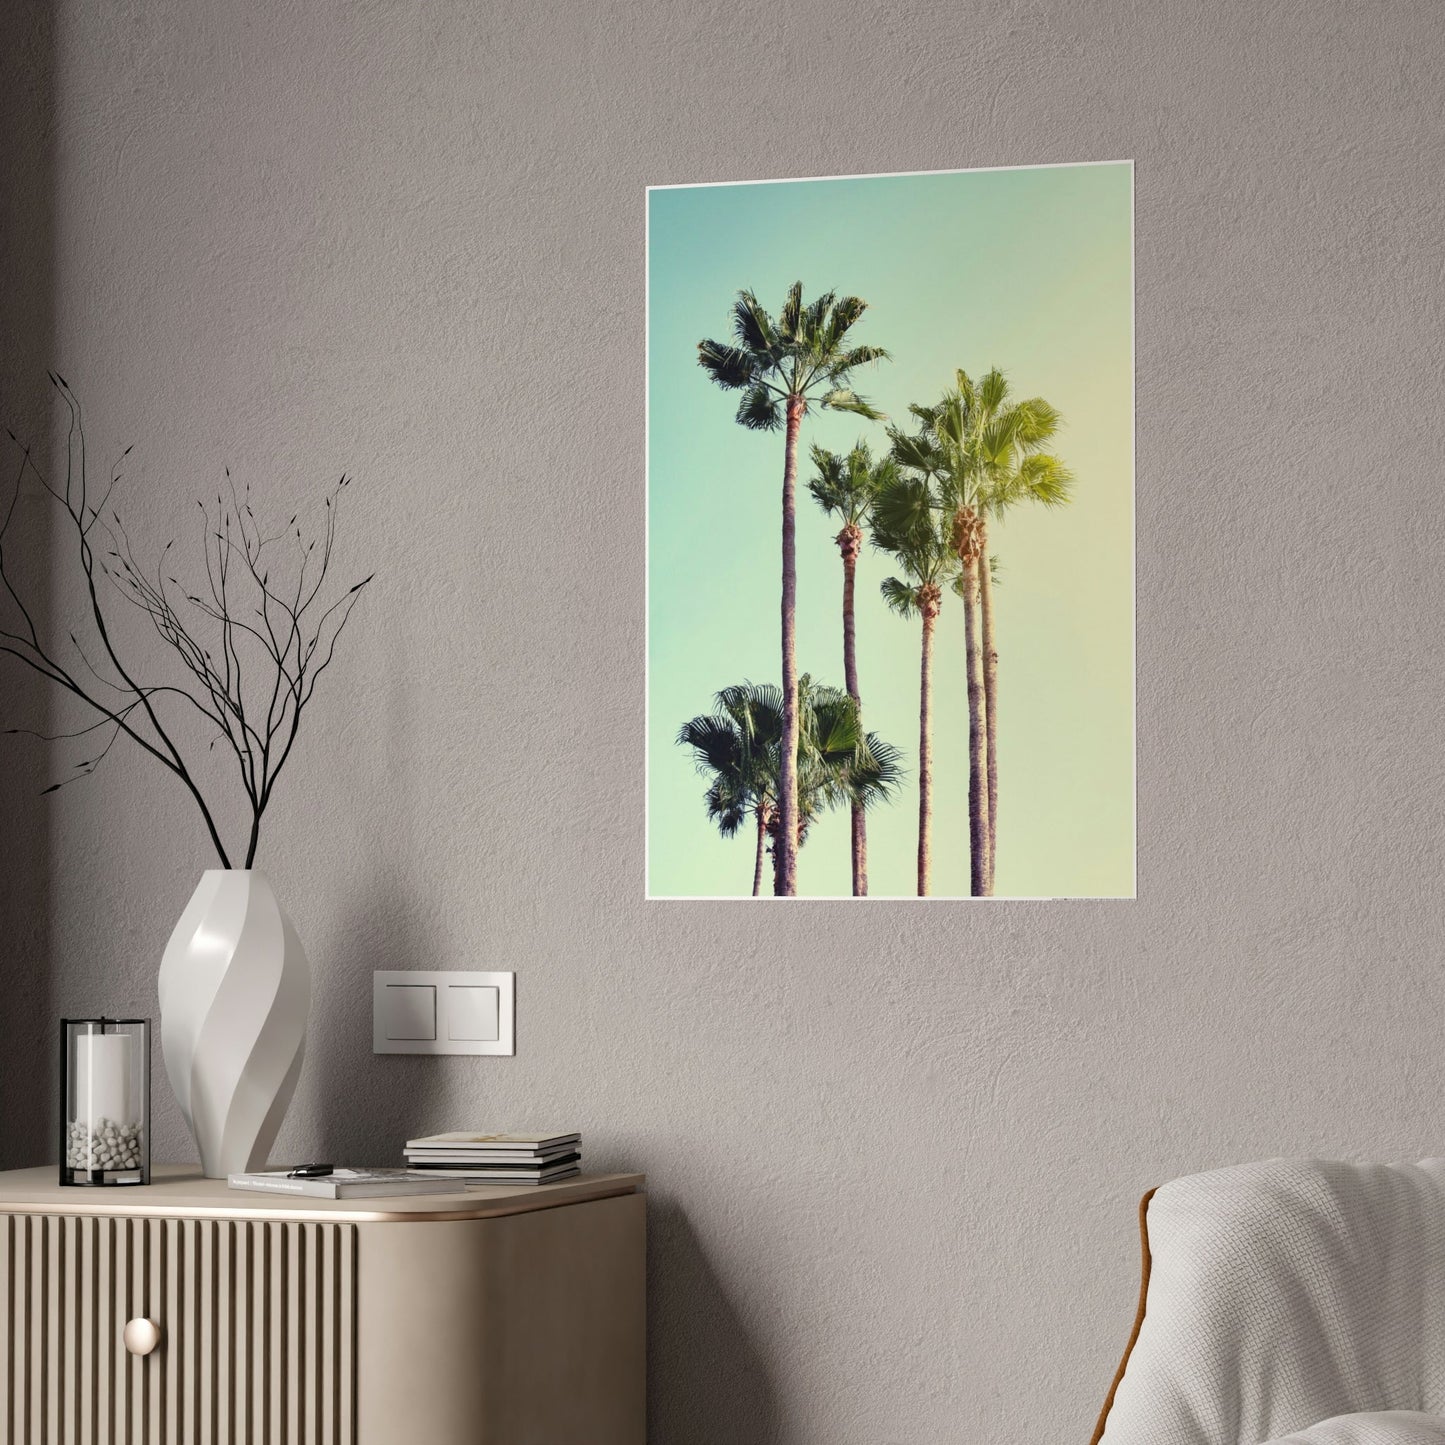 The Palm's Path: A Mesmerizing Wall Art of Palm Trees Lining a Road